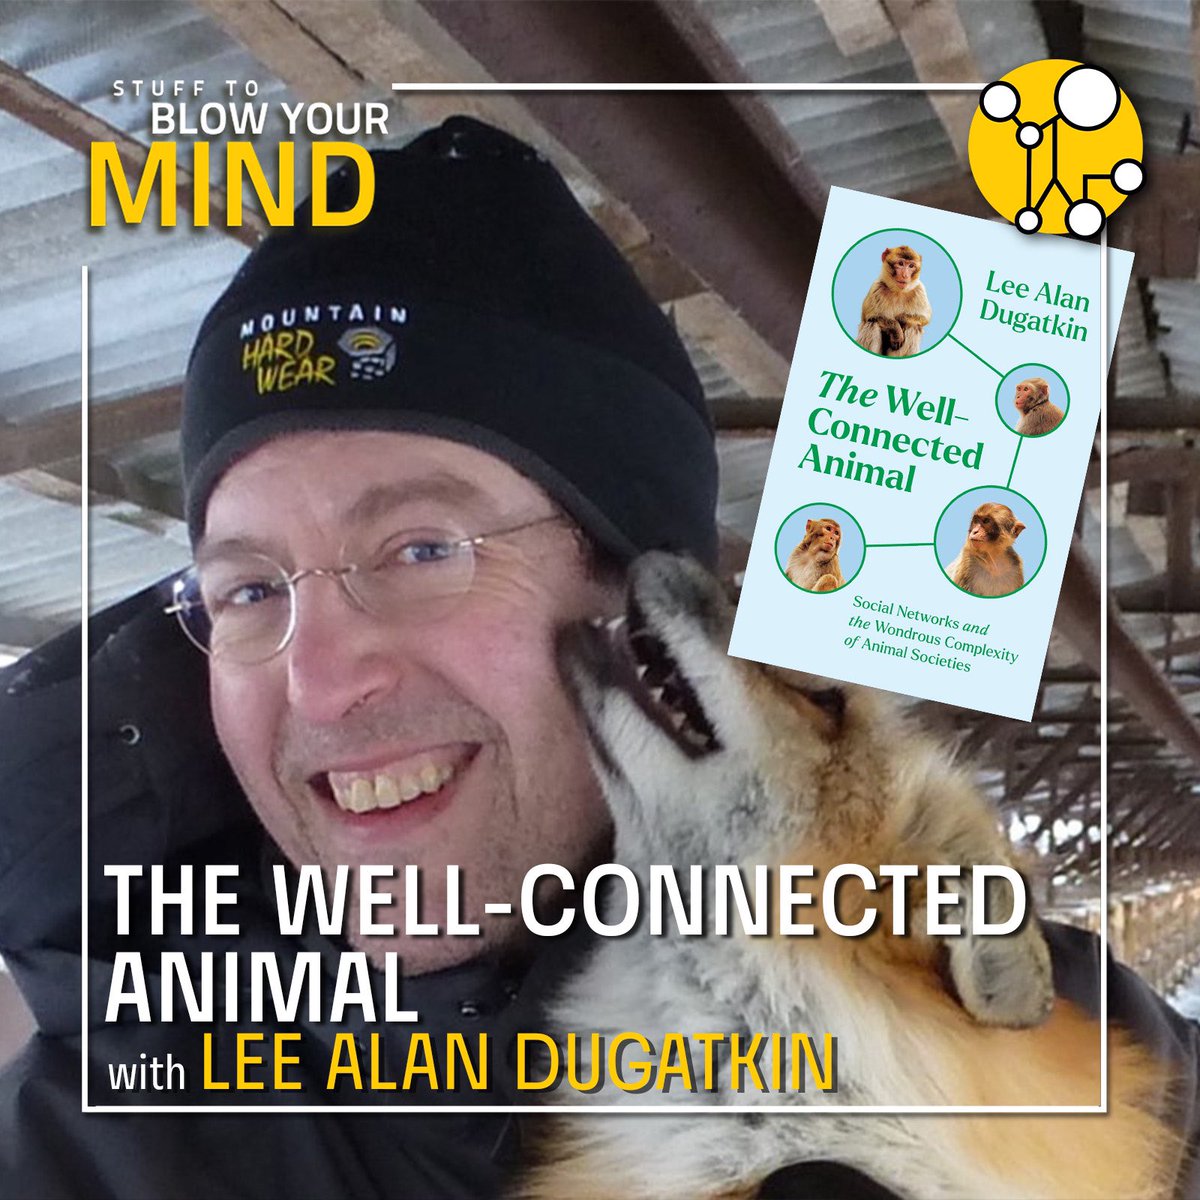 In this episode of STBYM, Robert chats with evolutionary biologist Lee Alan Dugatkin about his new book “The Well-Connected Animal.” You'll learn about the complex social networks of vampire bats, dolphins, bees and more.  omny.fm/shows/stuff-to…